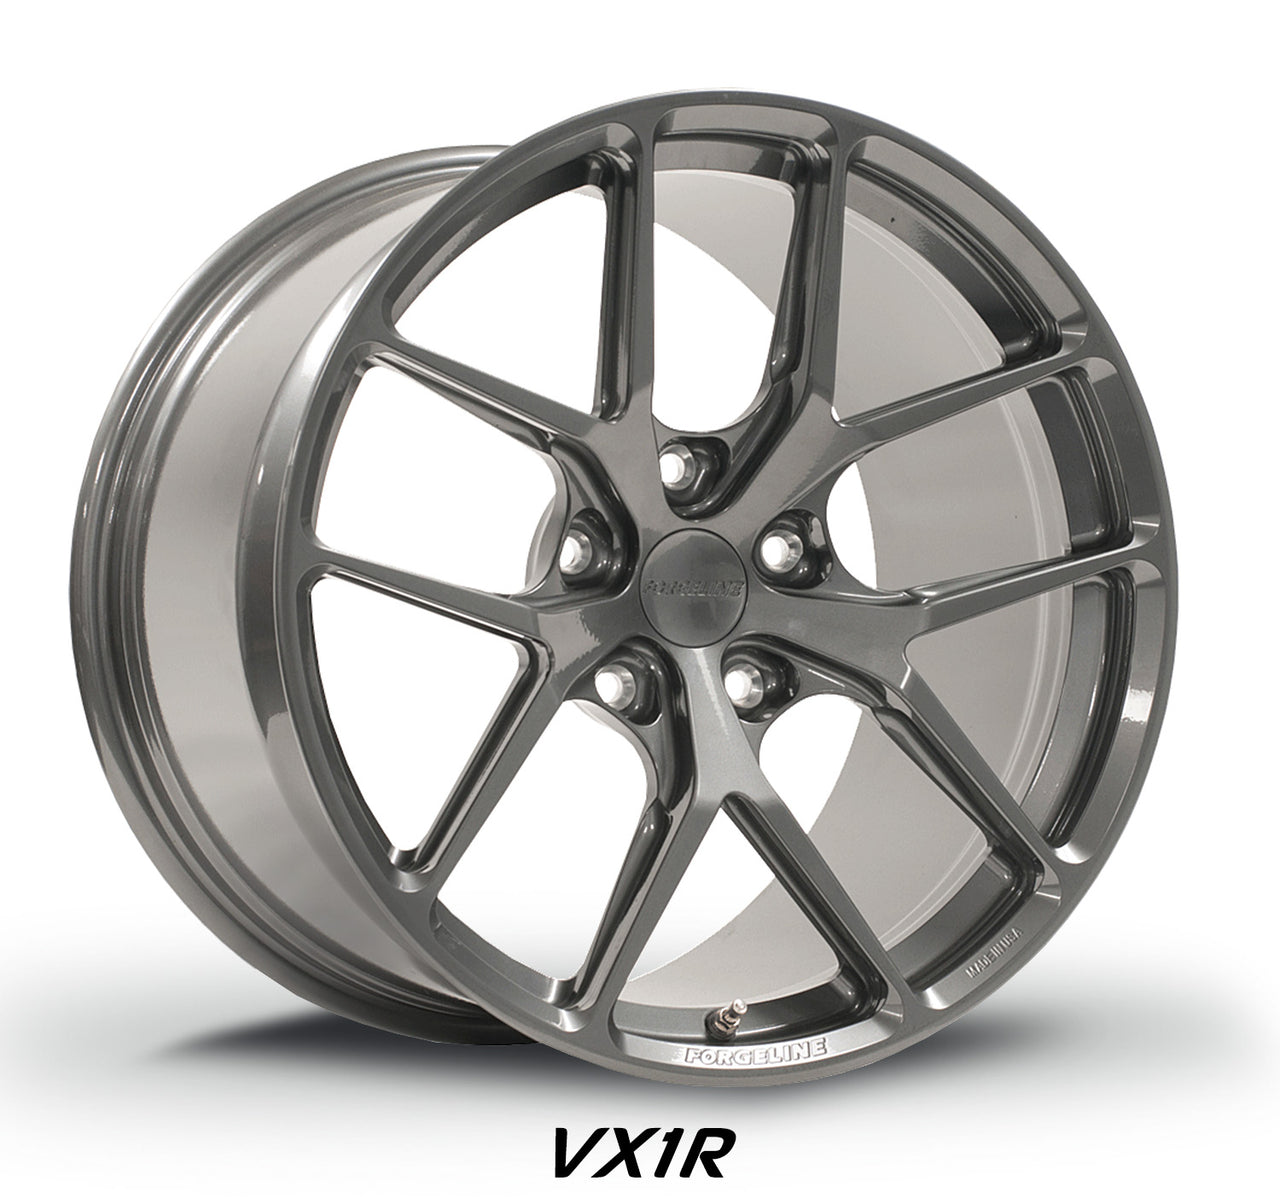 Forgeline Wheels VX1R in Pearl Gray are strong light and stiff the best wheels for taking the Camaro Z/28 to the race track.